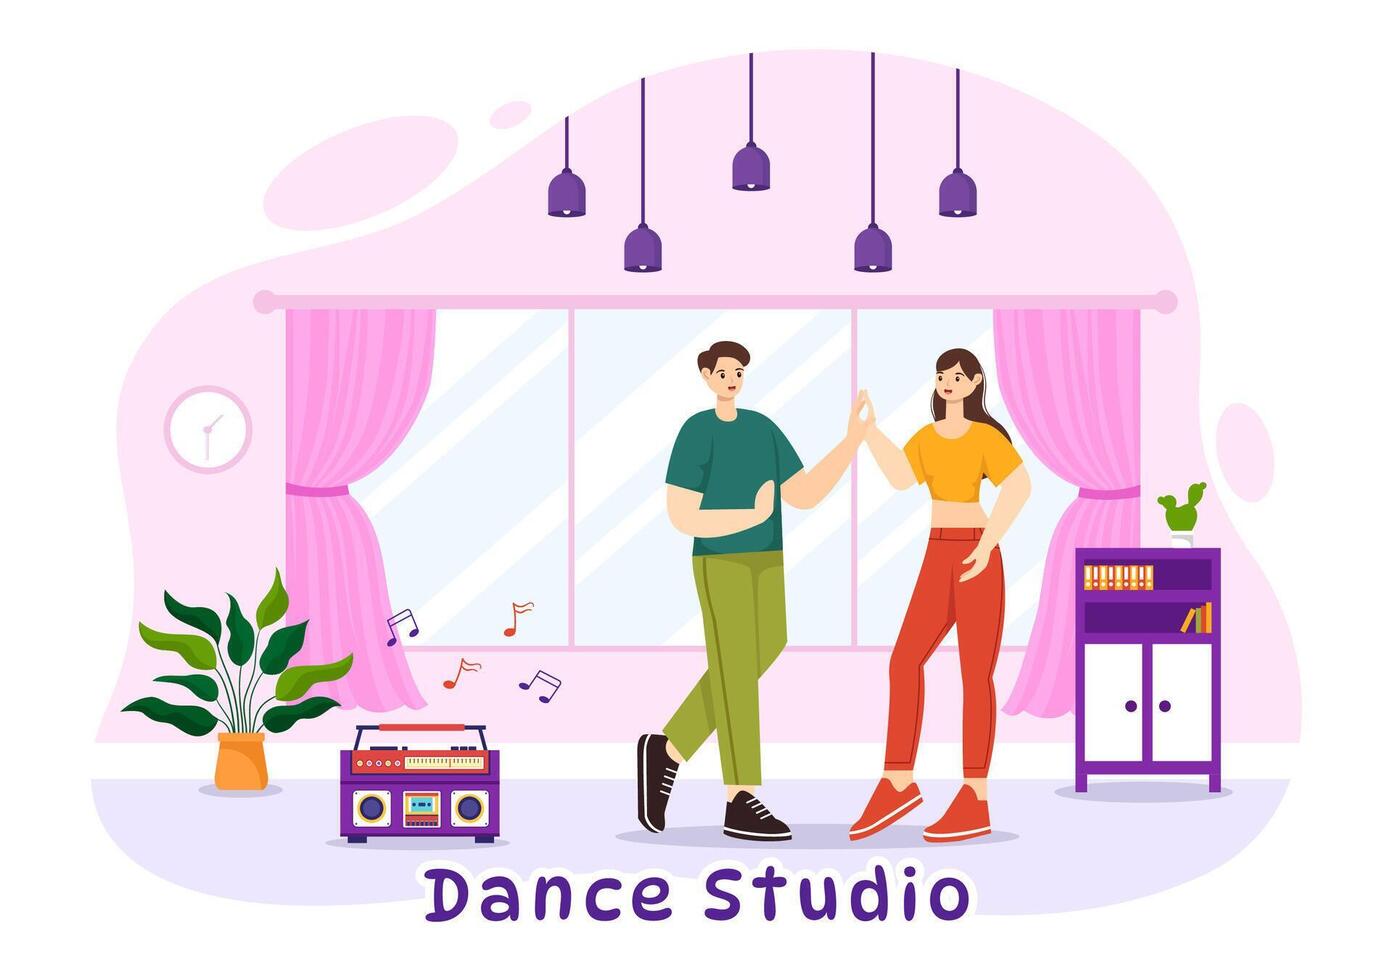 Dance Studio Vector Illustration with Dancing Couples Performing Accompanied by Music in Flat Cartoon Background Design